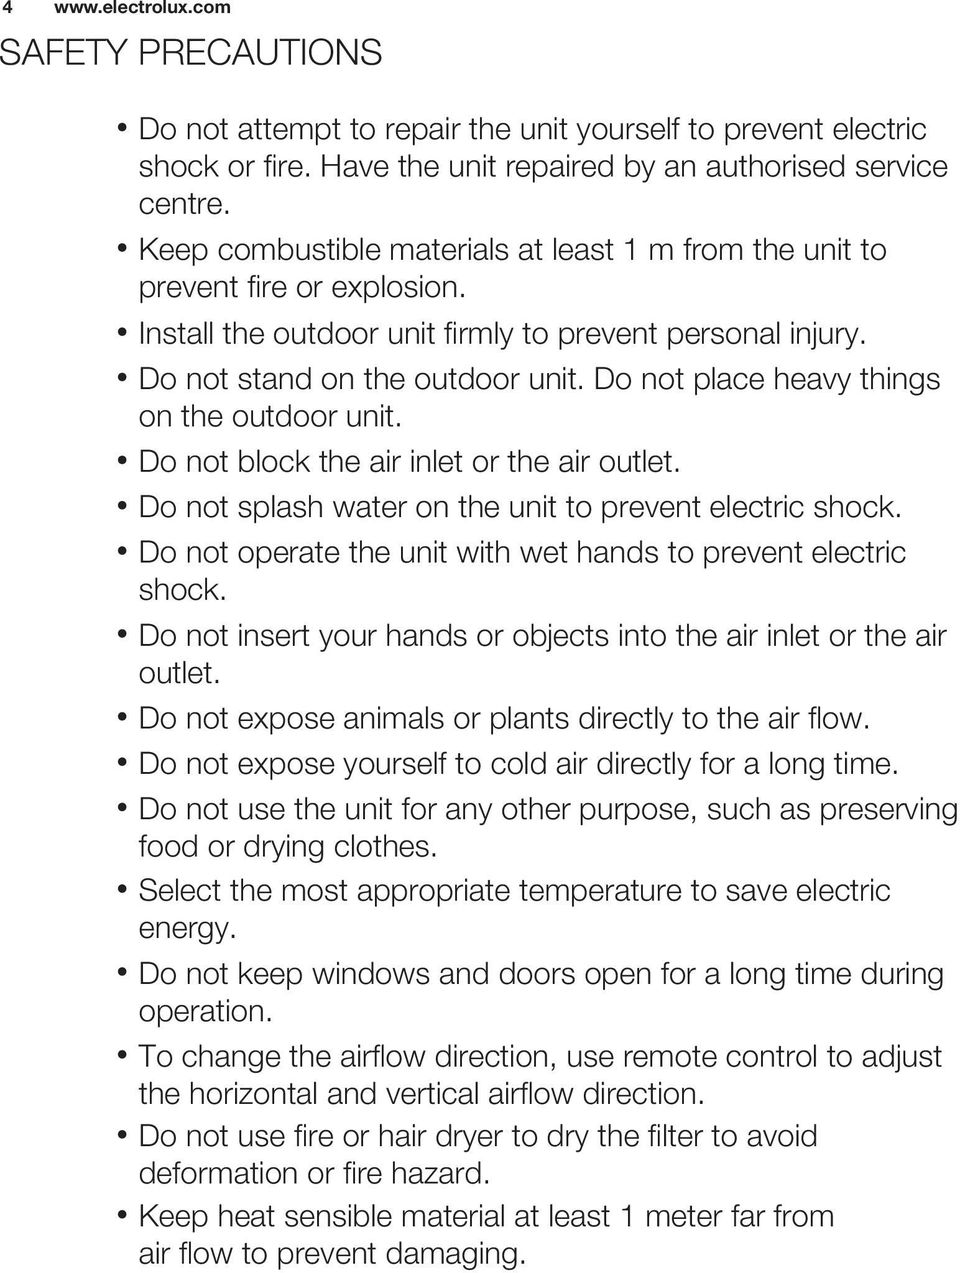 Do not place heavy things on the outdoor unit. Do not block the air inlet or the air outlet. Do not splash water on the unit to prevent electric shock.